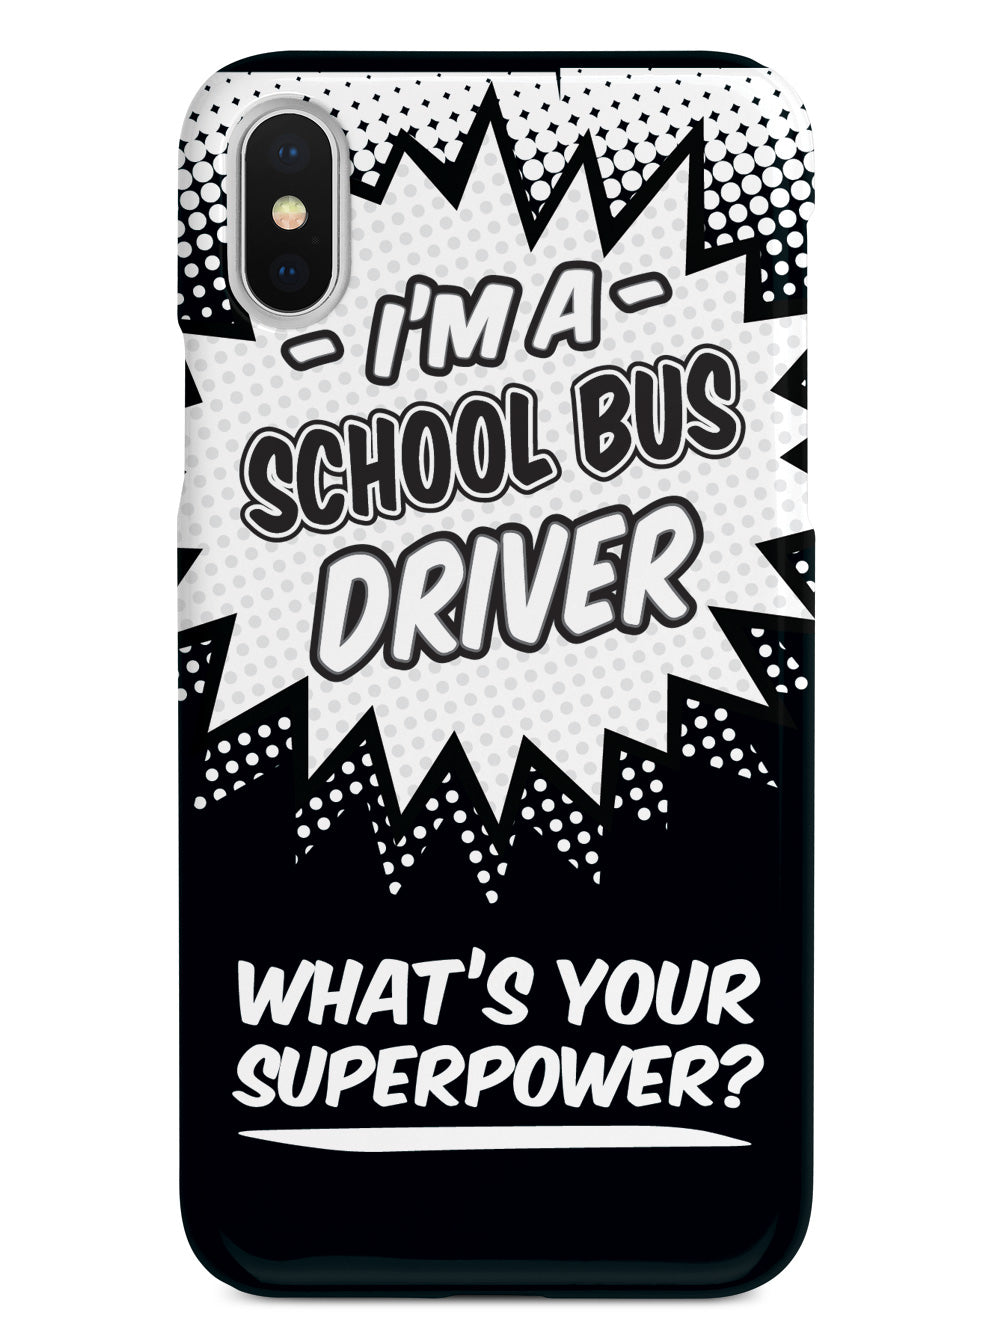 School Bus Driver - What's Your Superpower? Case